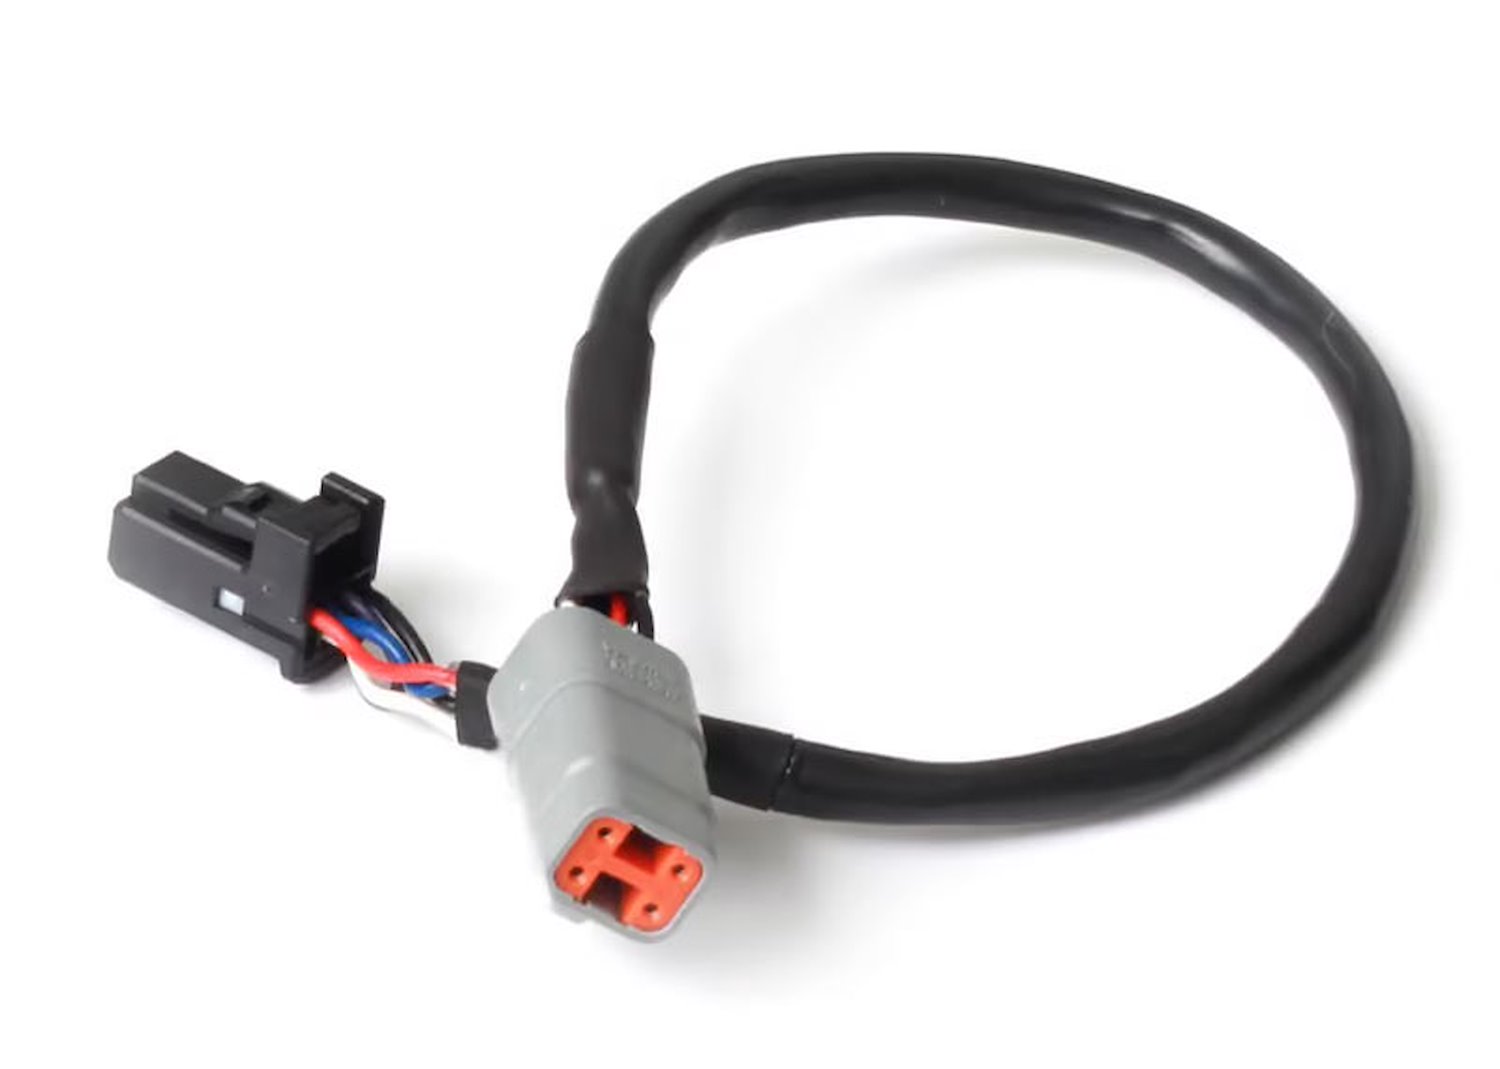 HT-130037 Elite CAN Cable, DTM-4, 8-Pin Black Tyco, 2400 mm (92 in.)